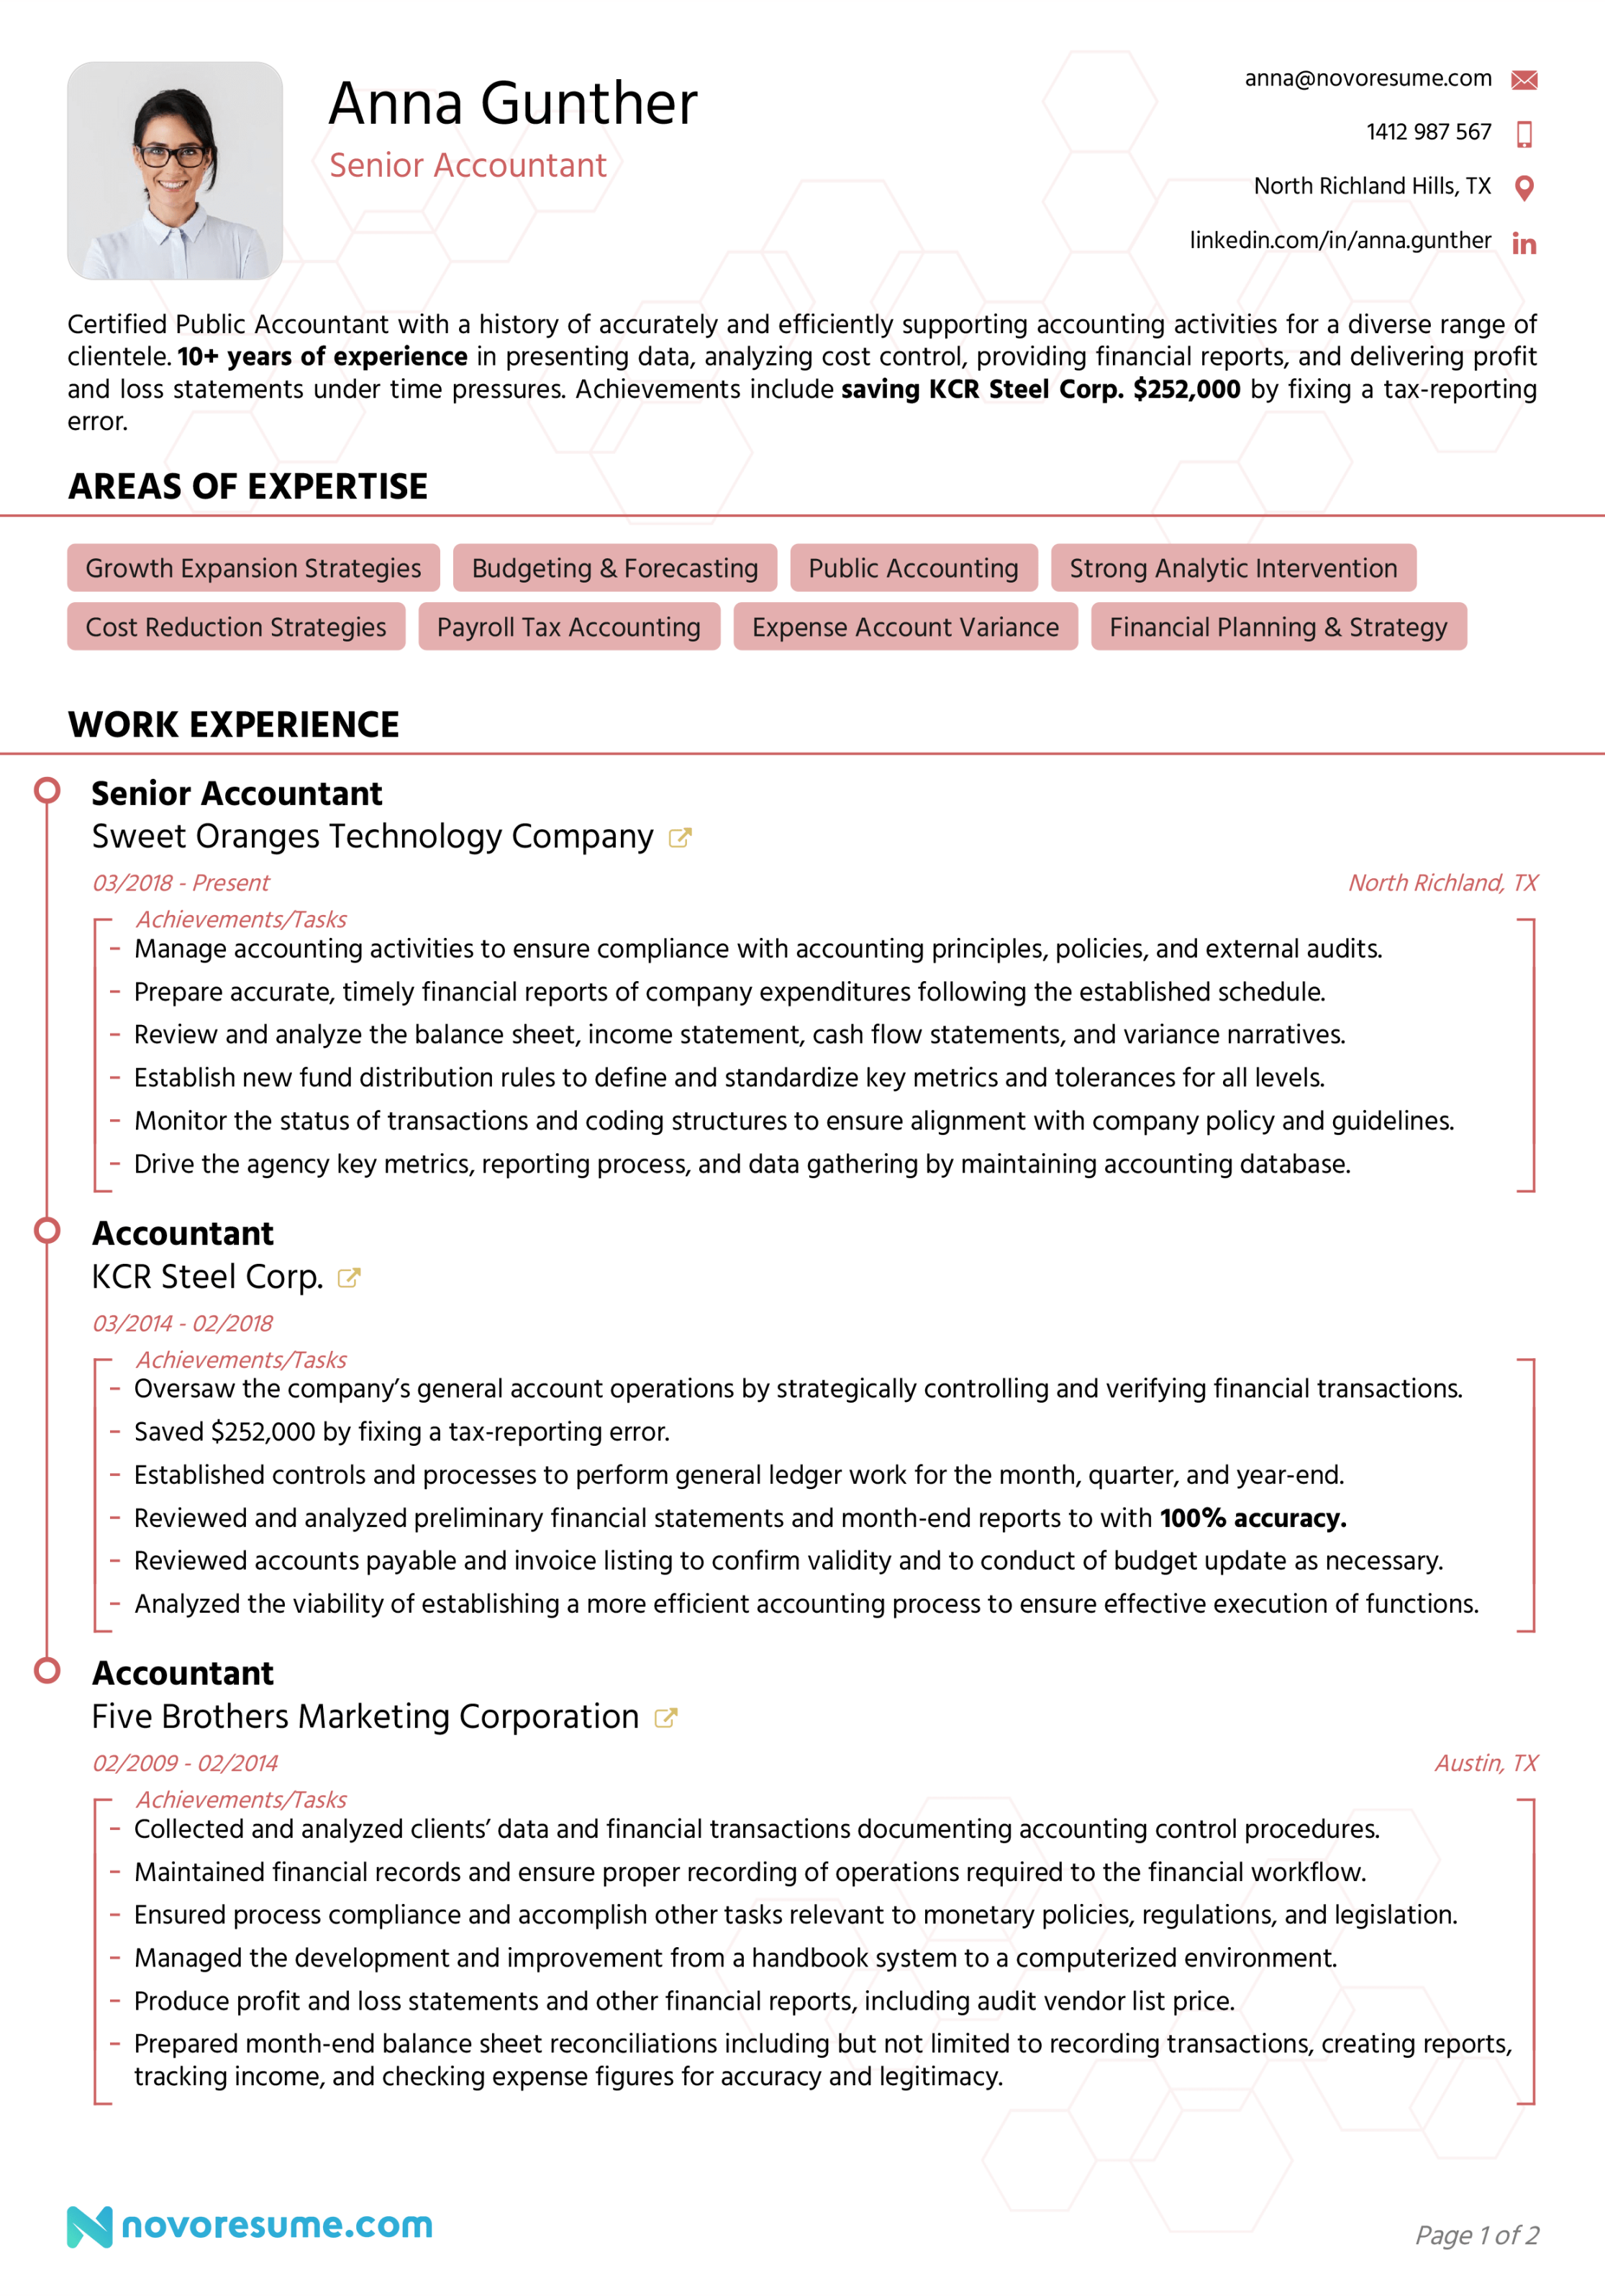 Accountant Resume - Writing Guide & Example for